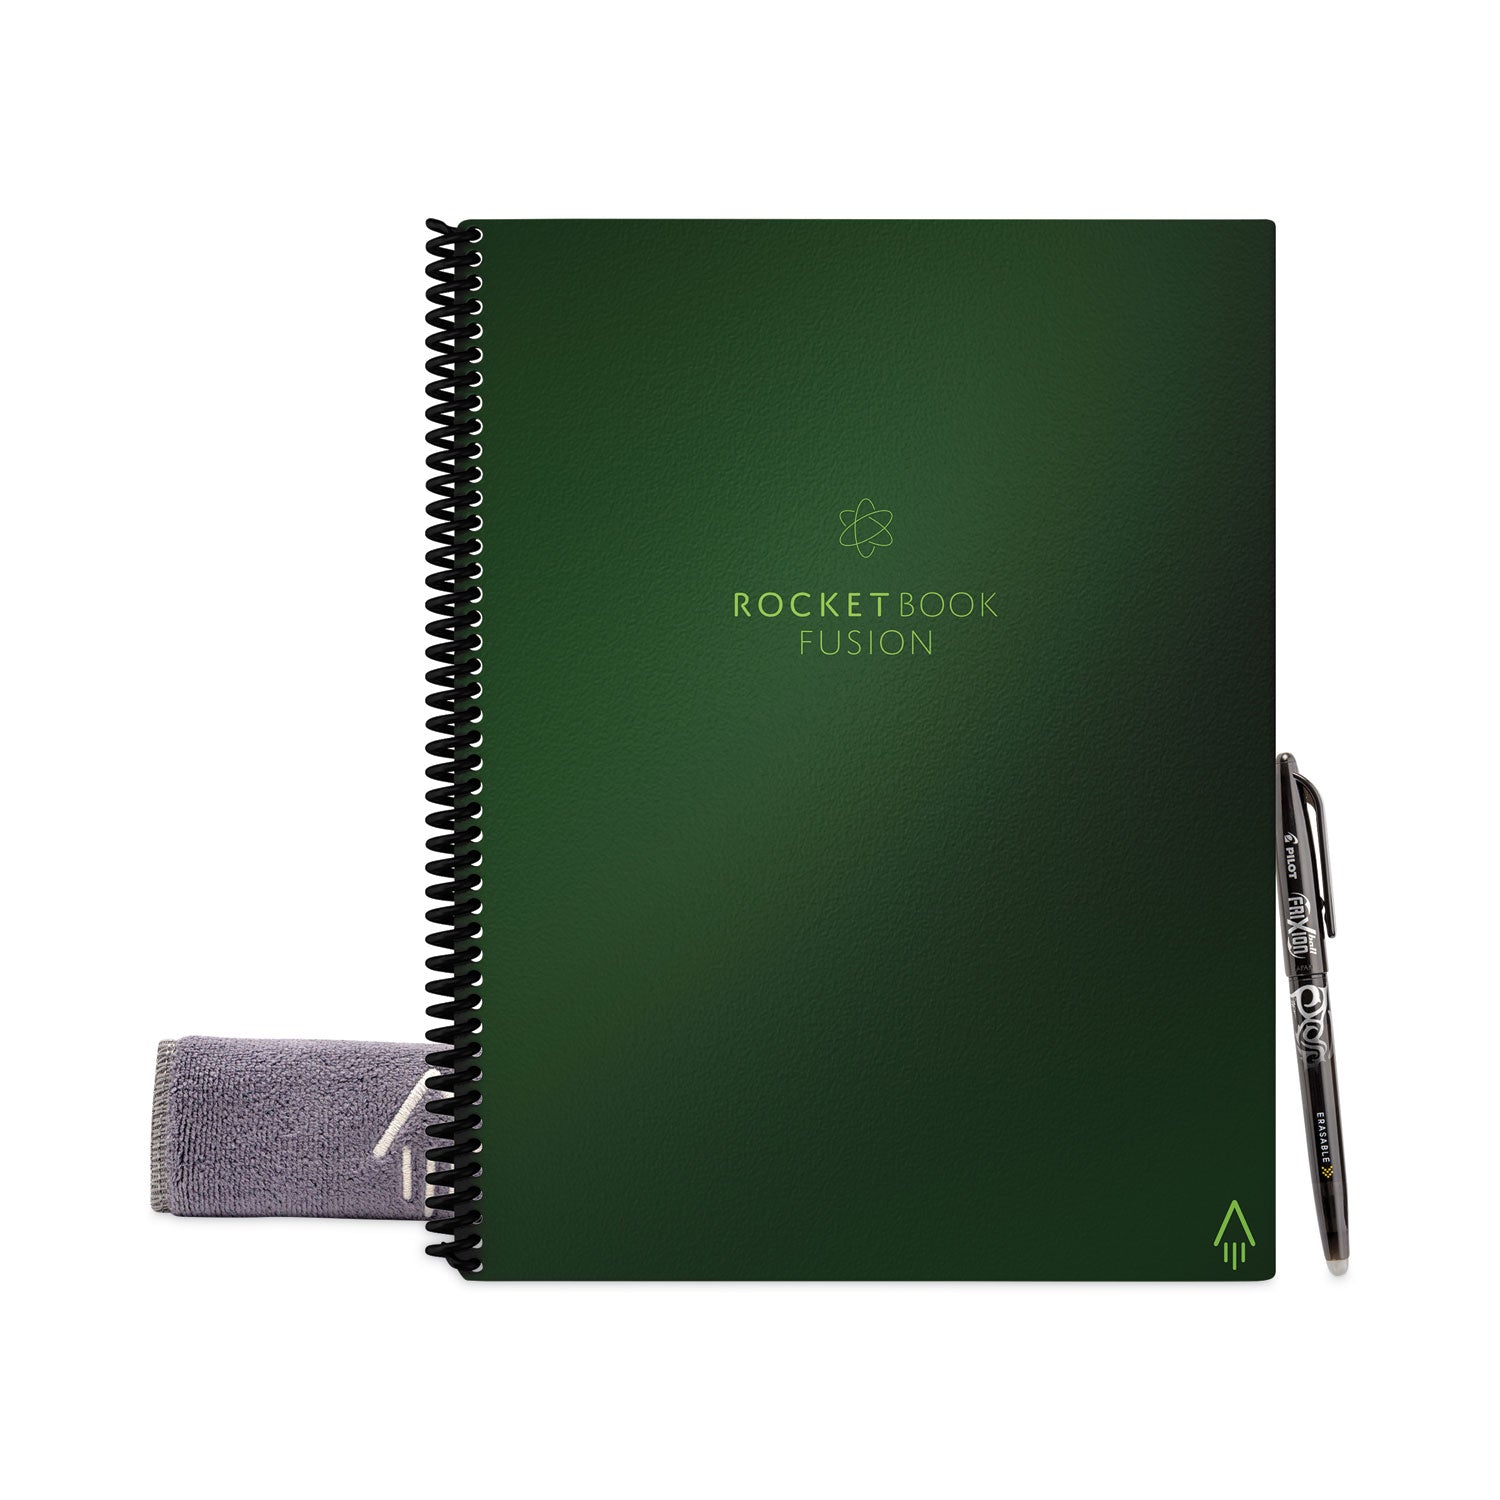 fusion-smart-notebook-seven-assorted-page-formats-terrestrial-green-cover-21-11-x-85-sheets_rkbevrflrcckgfr - 1